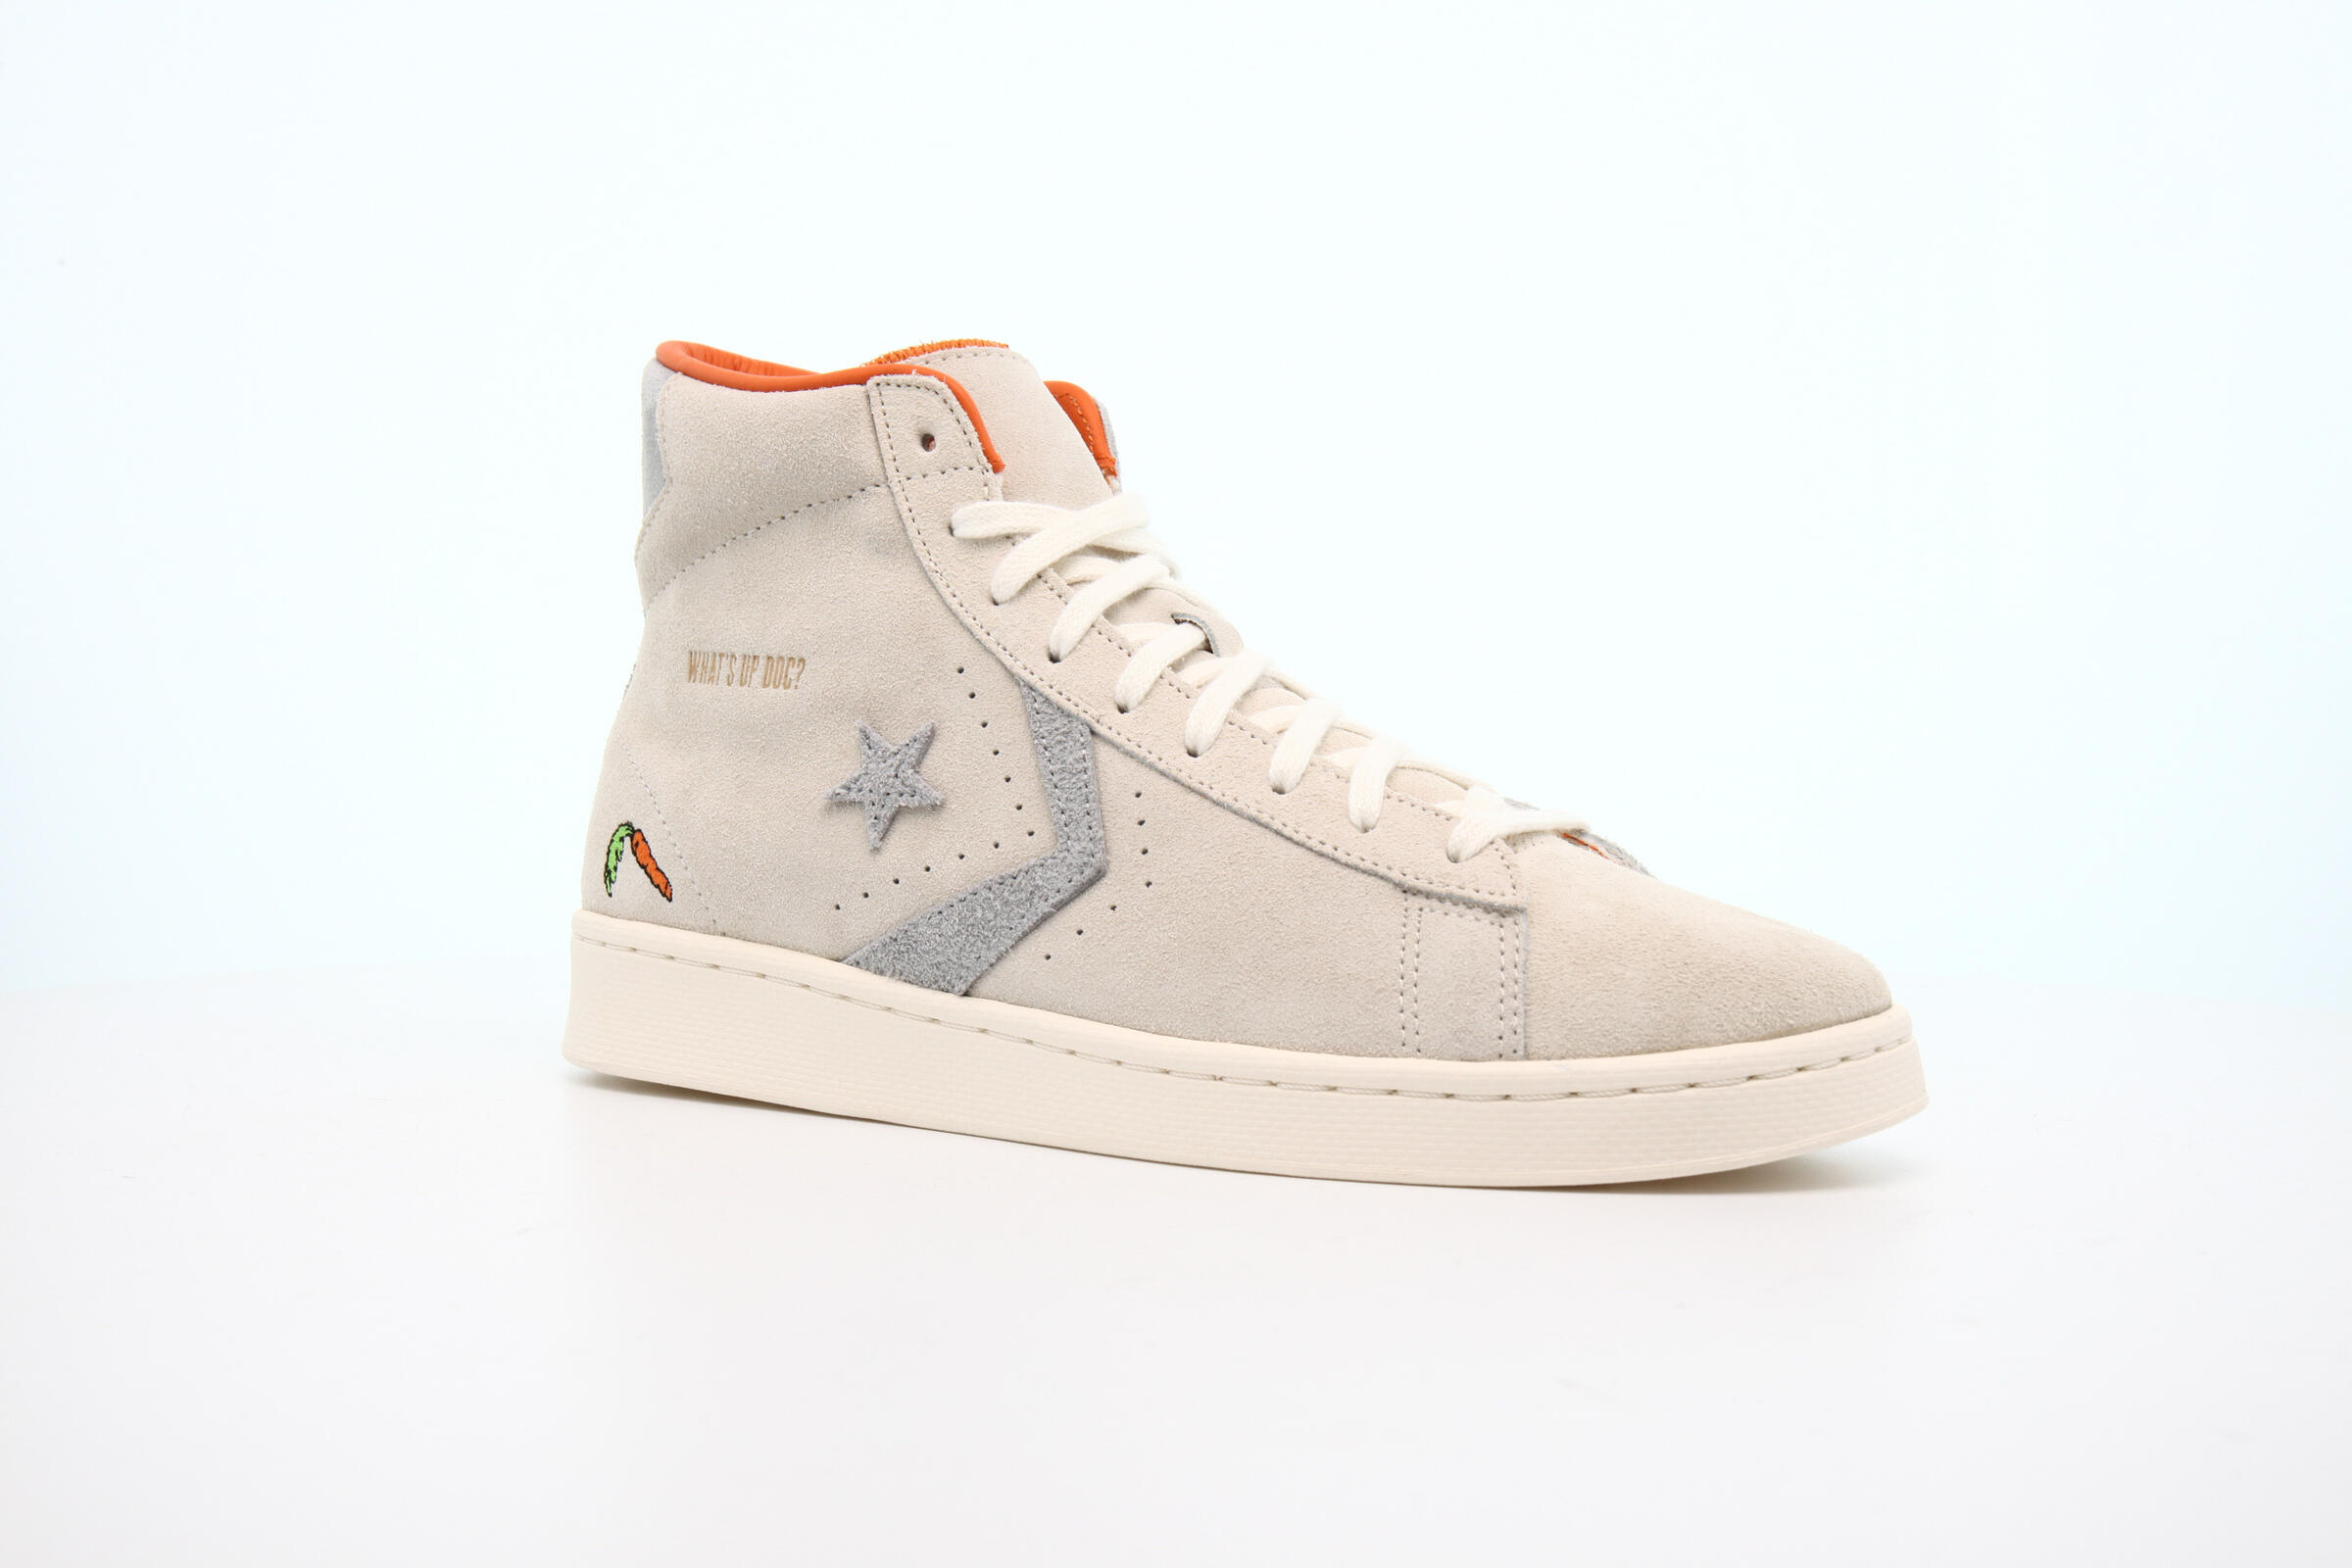 Converse x BUGS BUNNY 80TH PRO LEATHER HI "NATURAL"